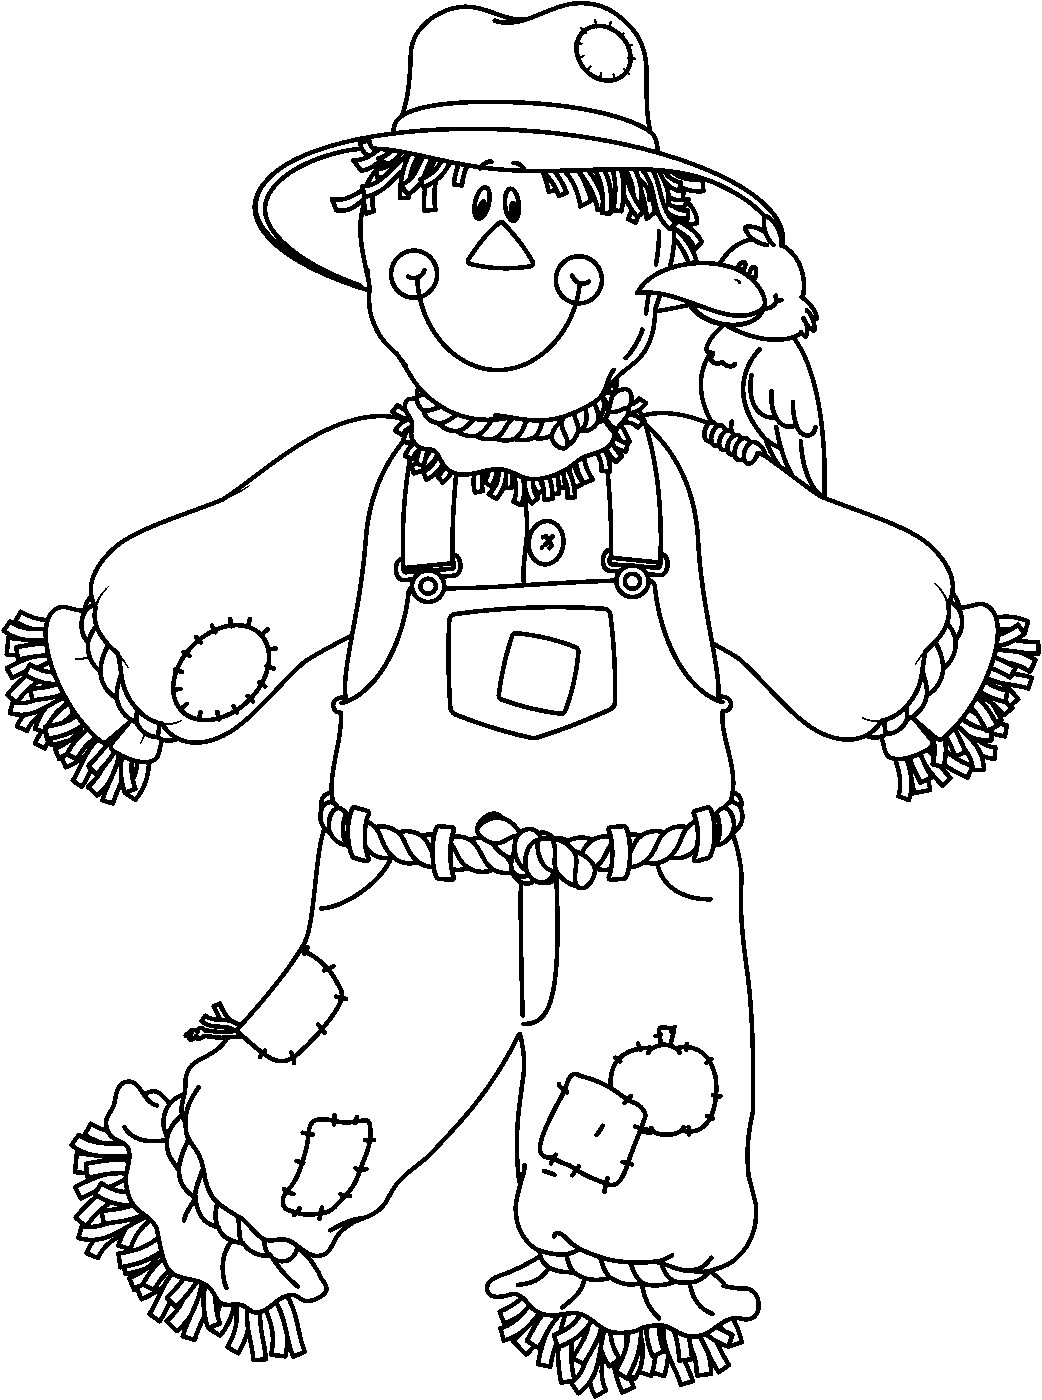 Printable Scarecrow Coloring Pages
 DZ Doodles Digital Stamps Oodles of Doodles News Tea Cup